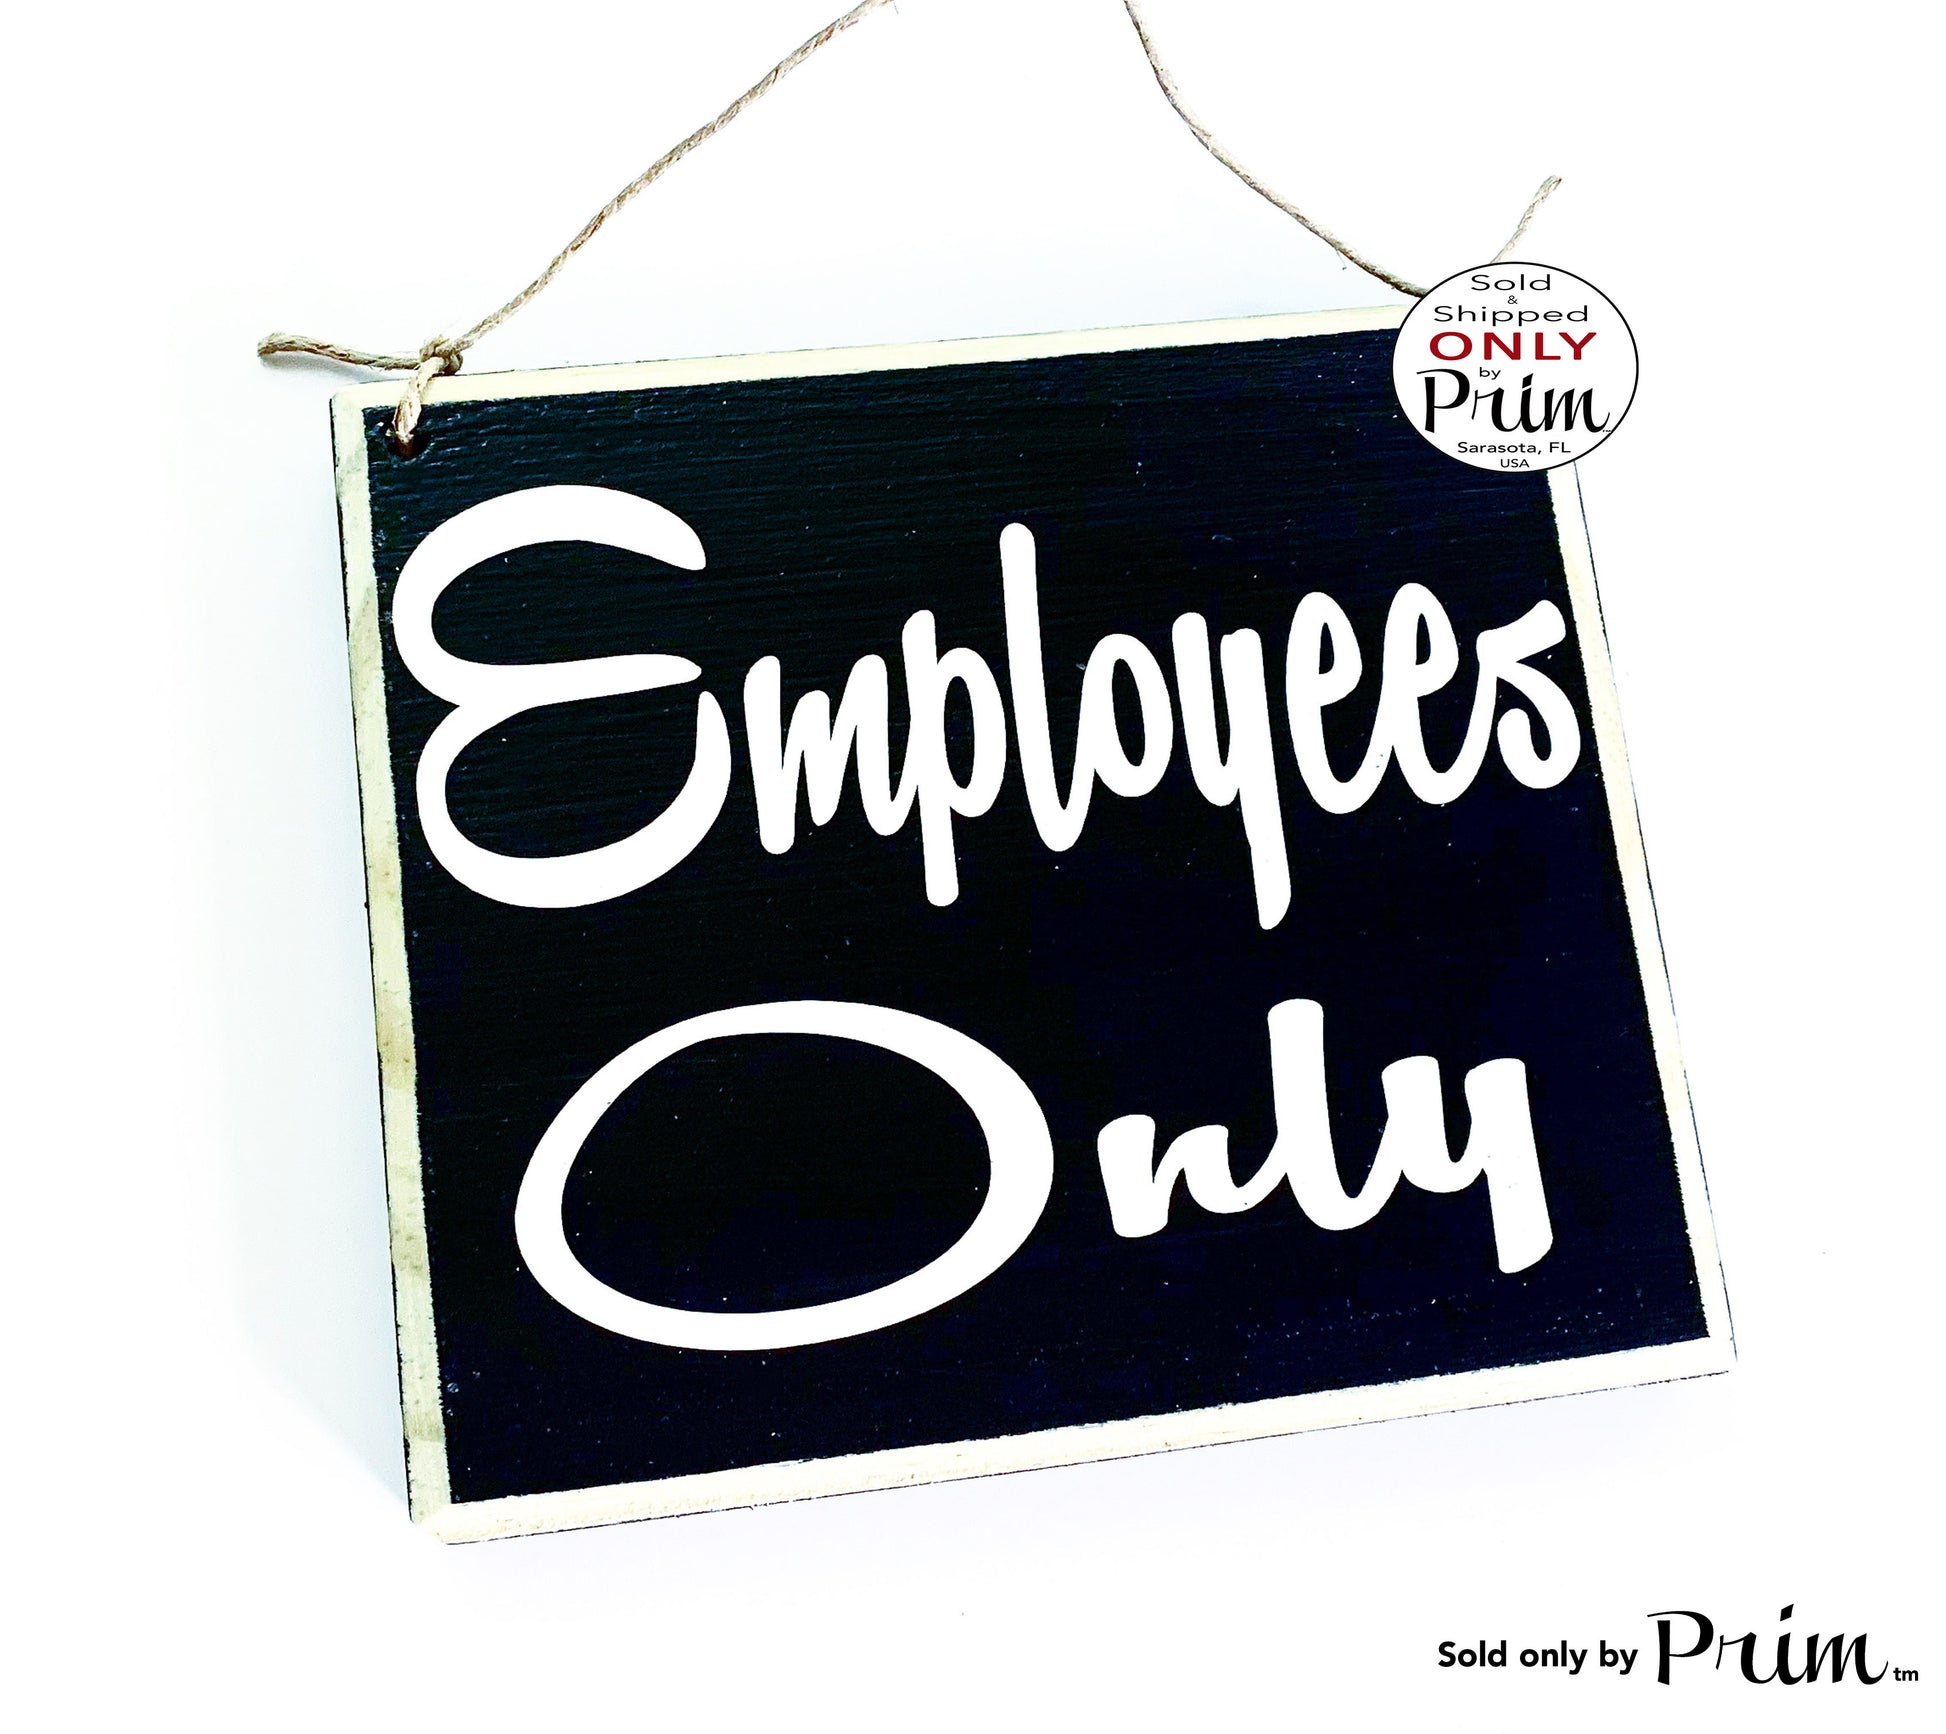 8x8 Employees Only Staff Custom Wood Sign | Office Volunteer Staff Shop Boutique Spa Do Not Enter Private No Entry Door Plaque